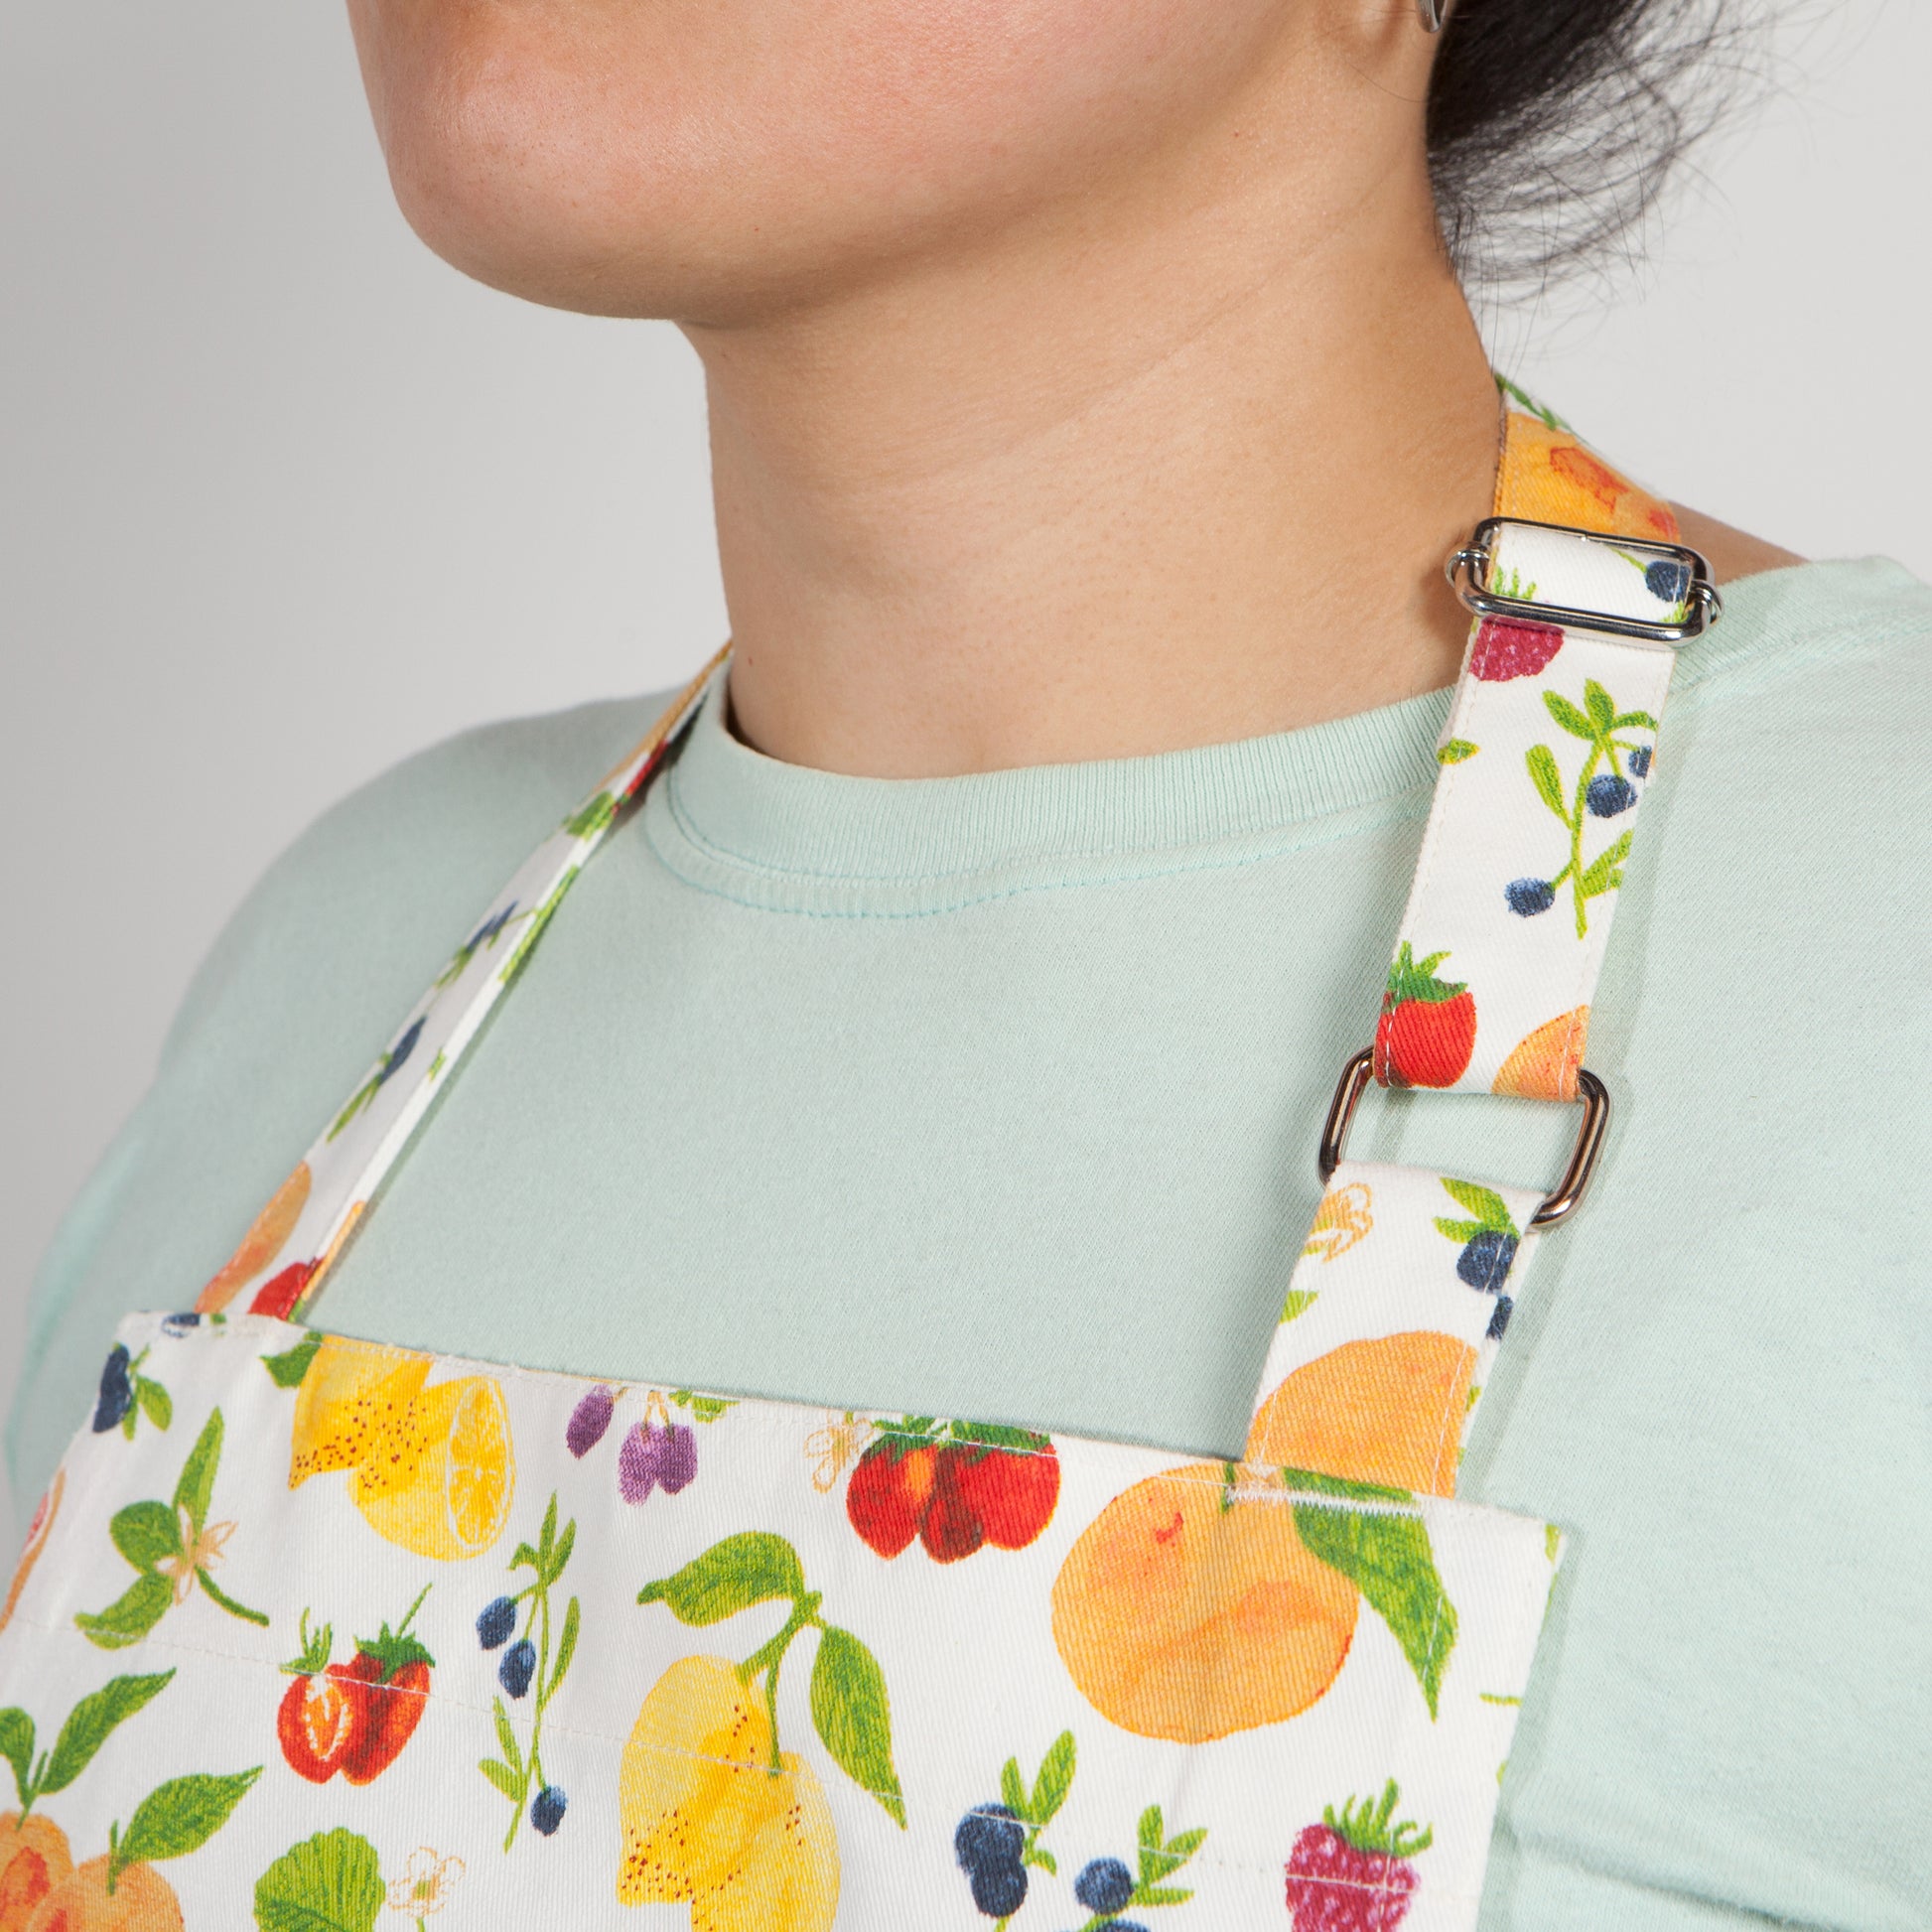 close-up of neck strap on person wearing apron.